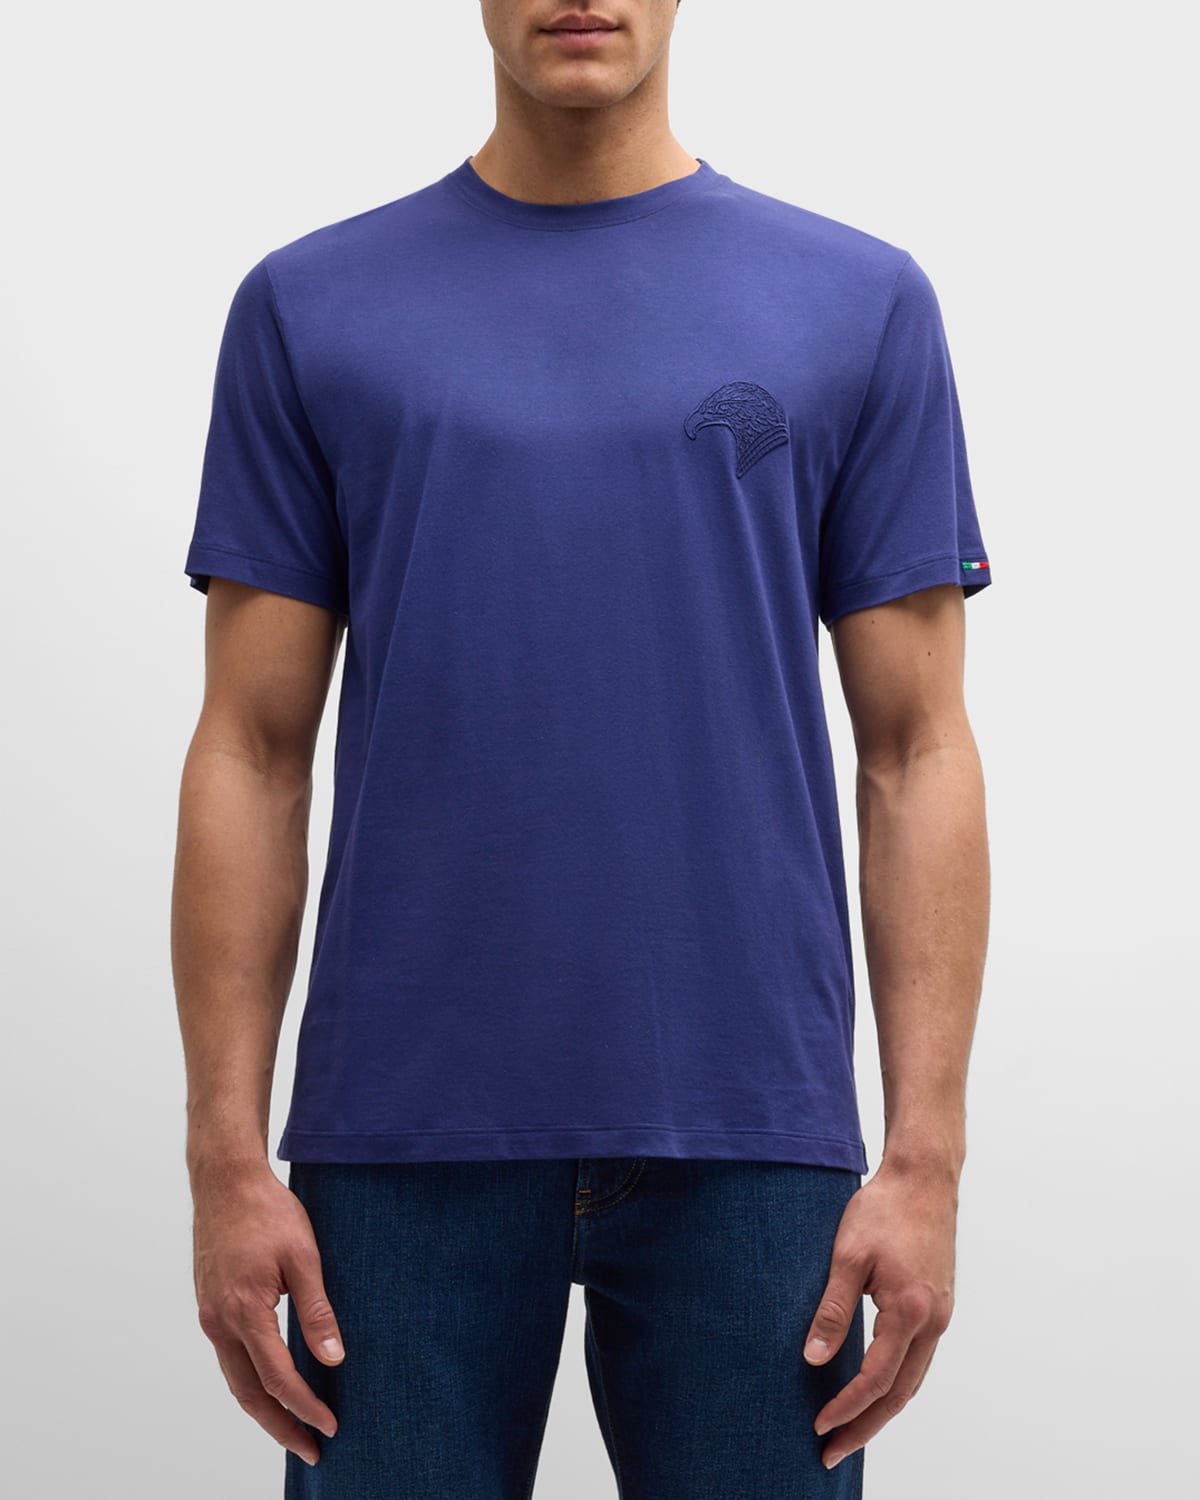 Men's Cotton Embroidered T-Shirt